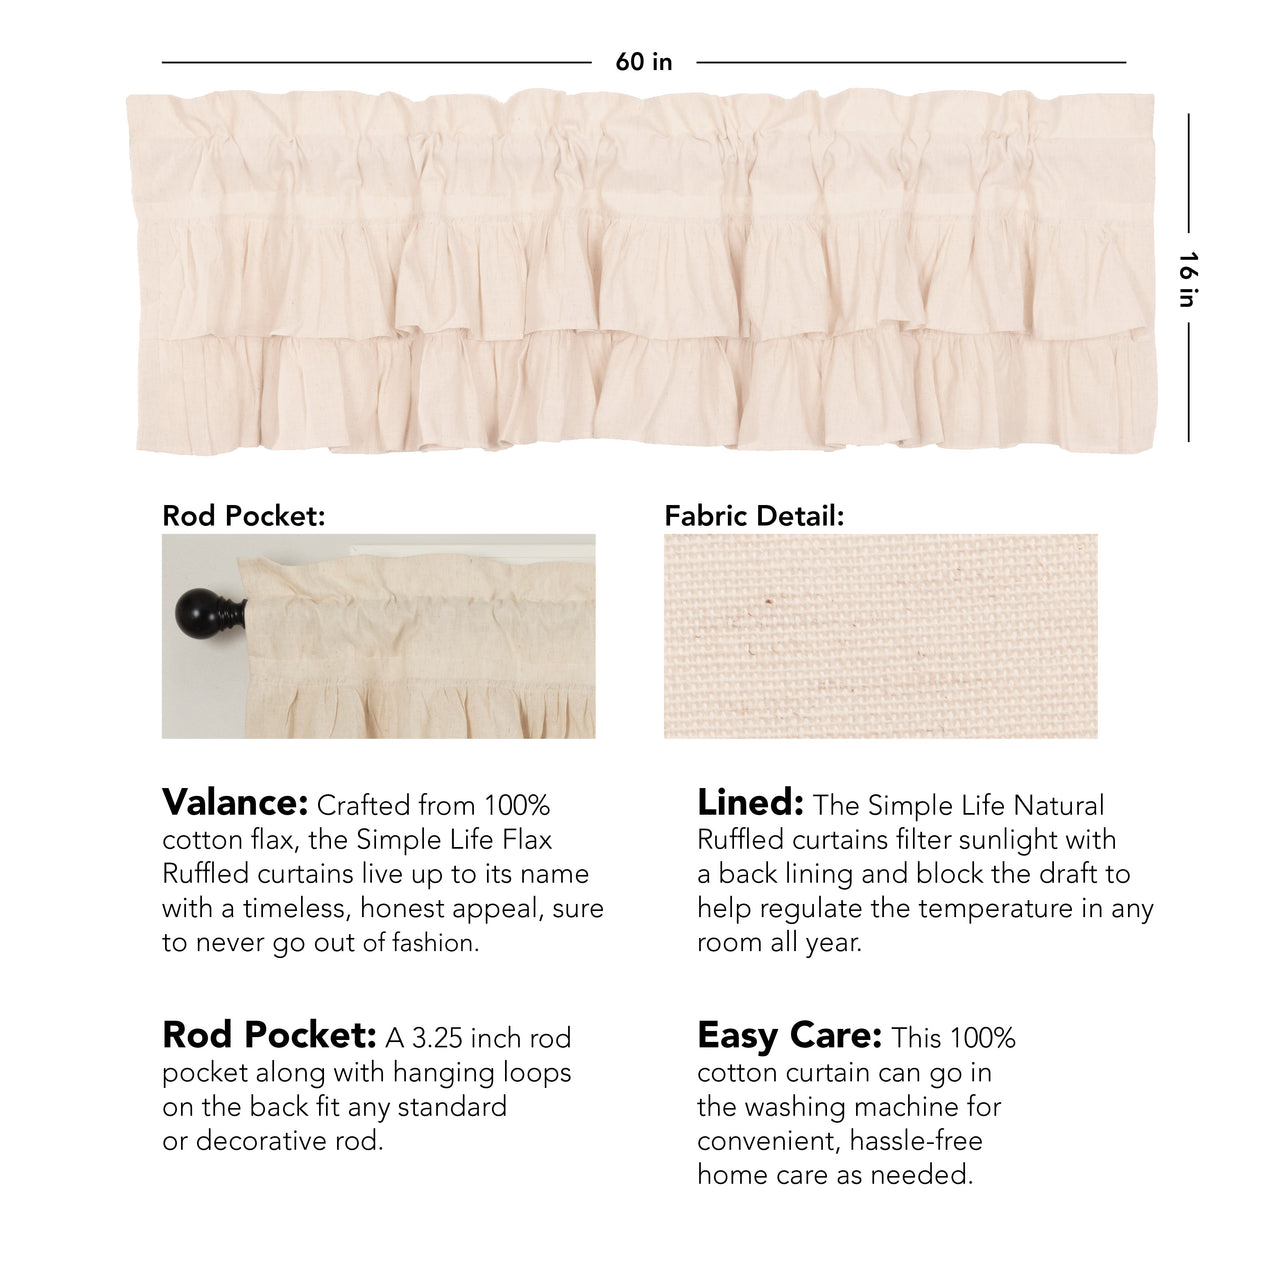 Simple Life Flax Natural Ruffled Valance Curtain VHC Brands